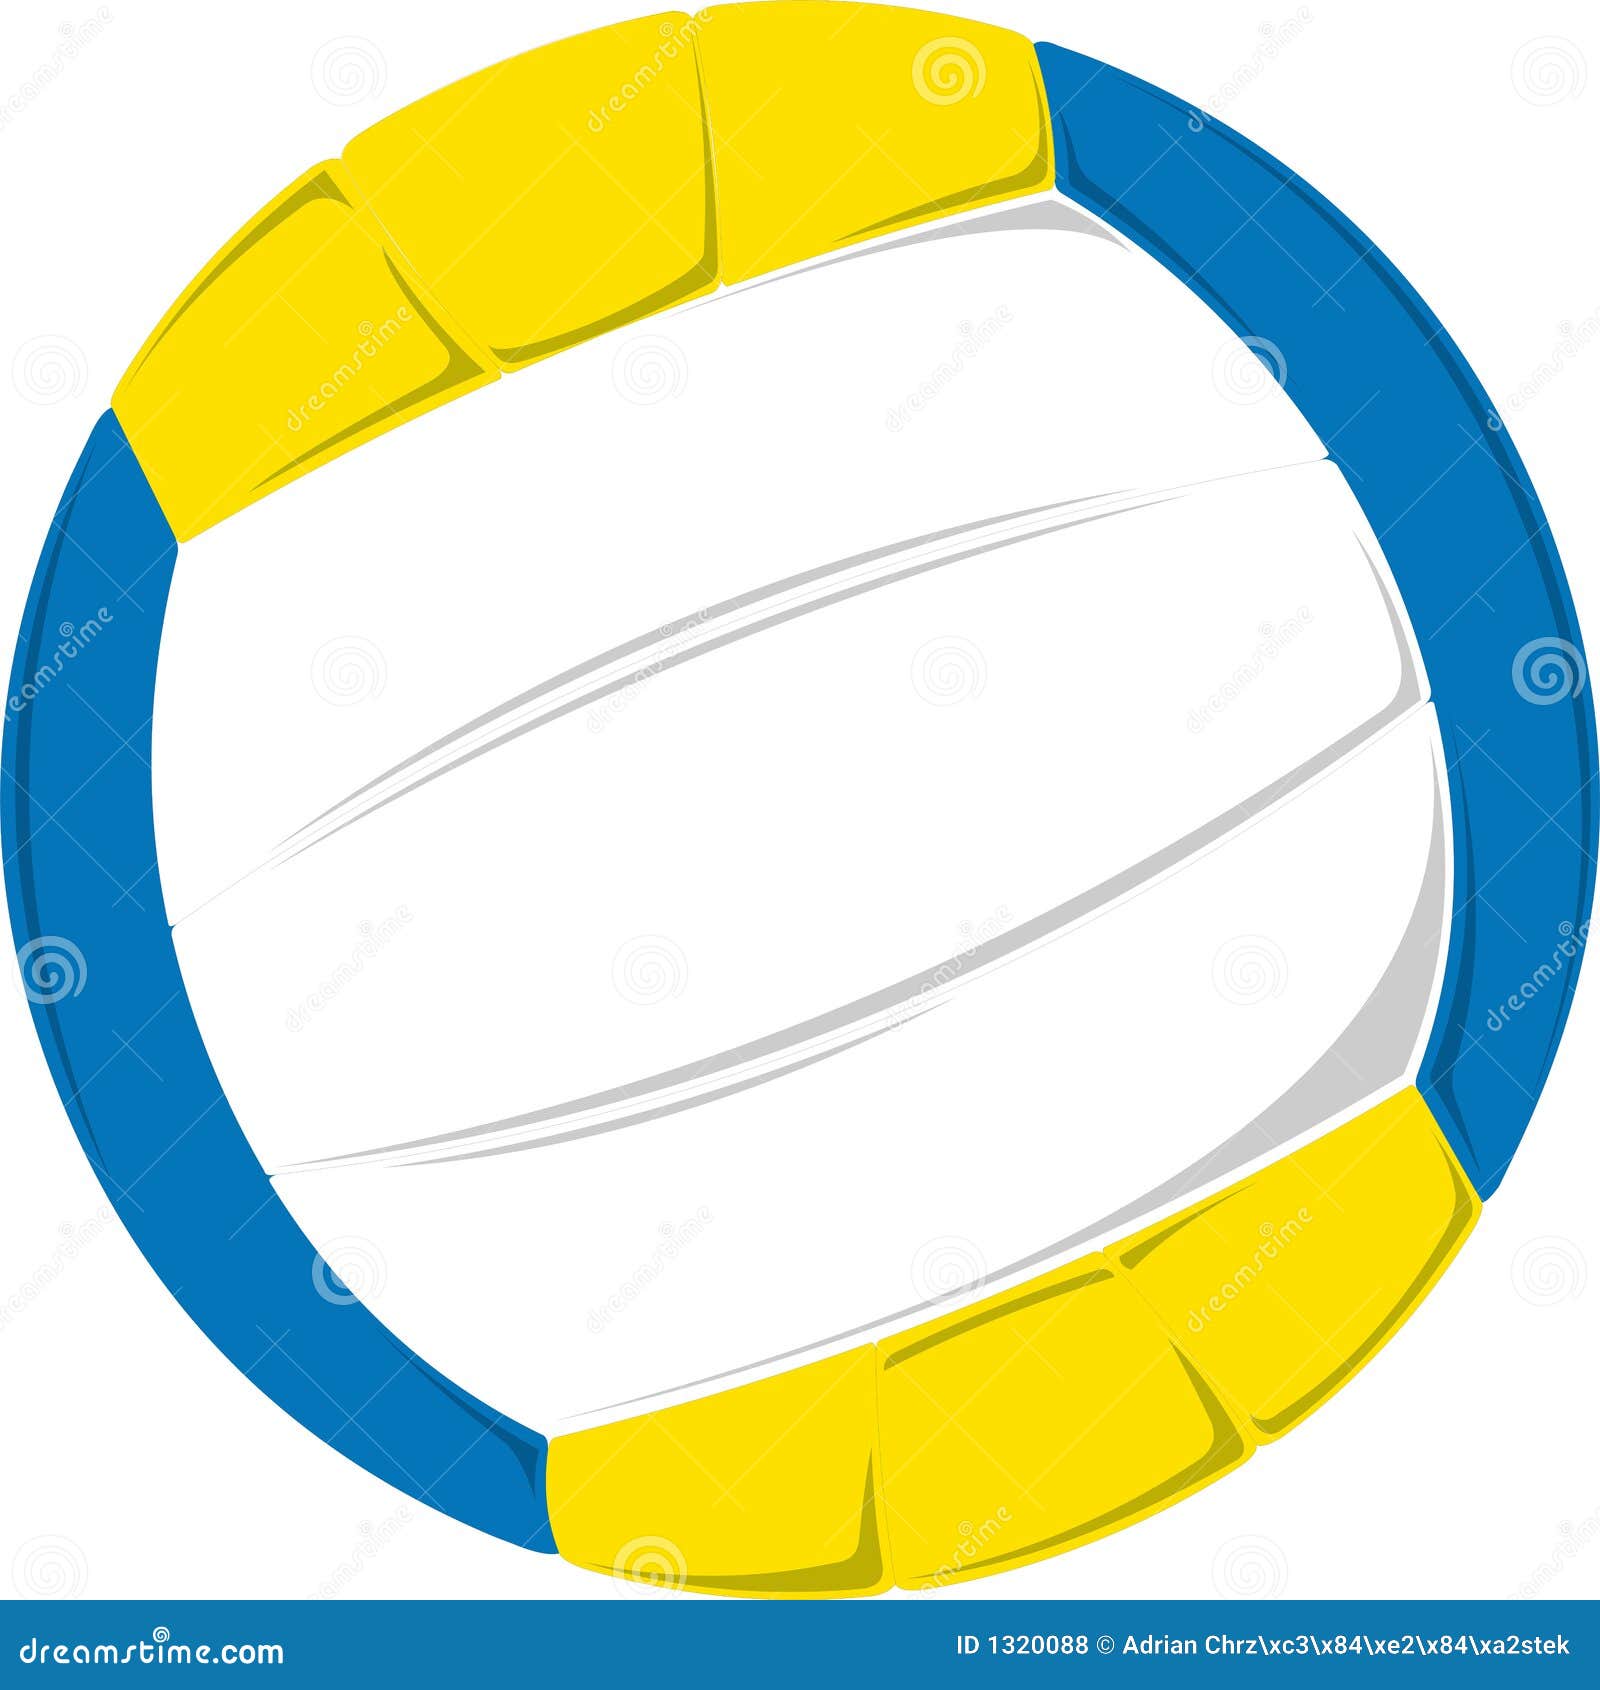 volleyball clipart vector - photo #24